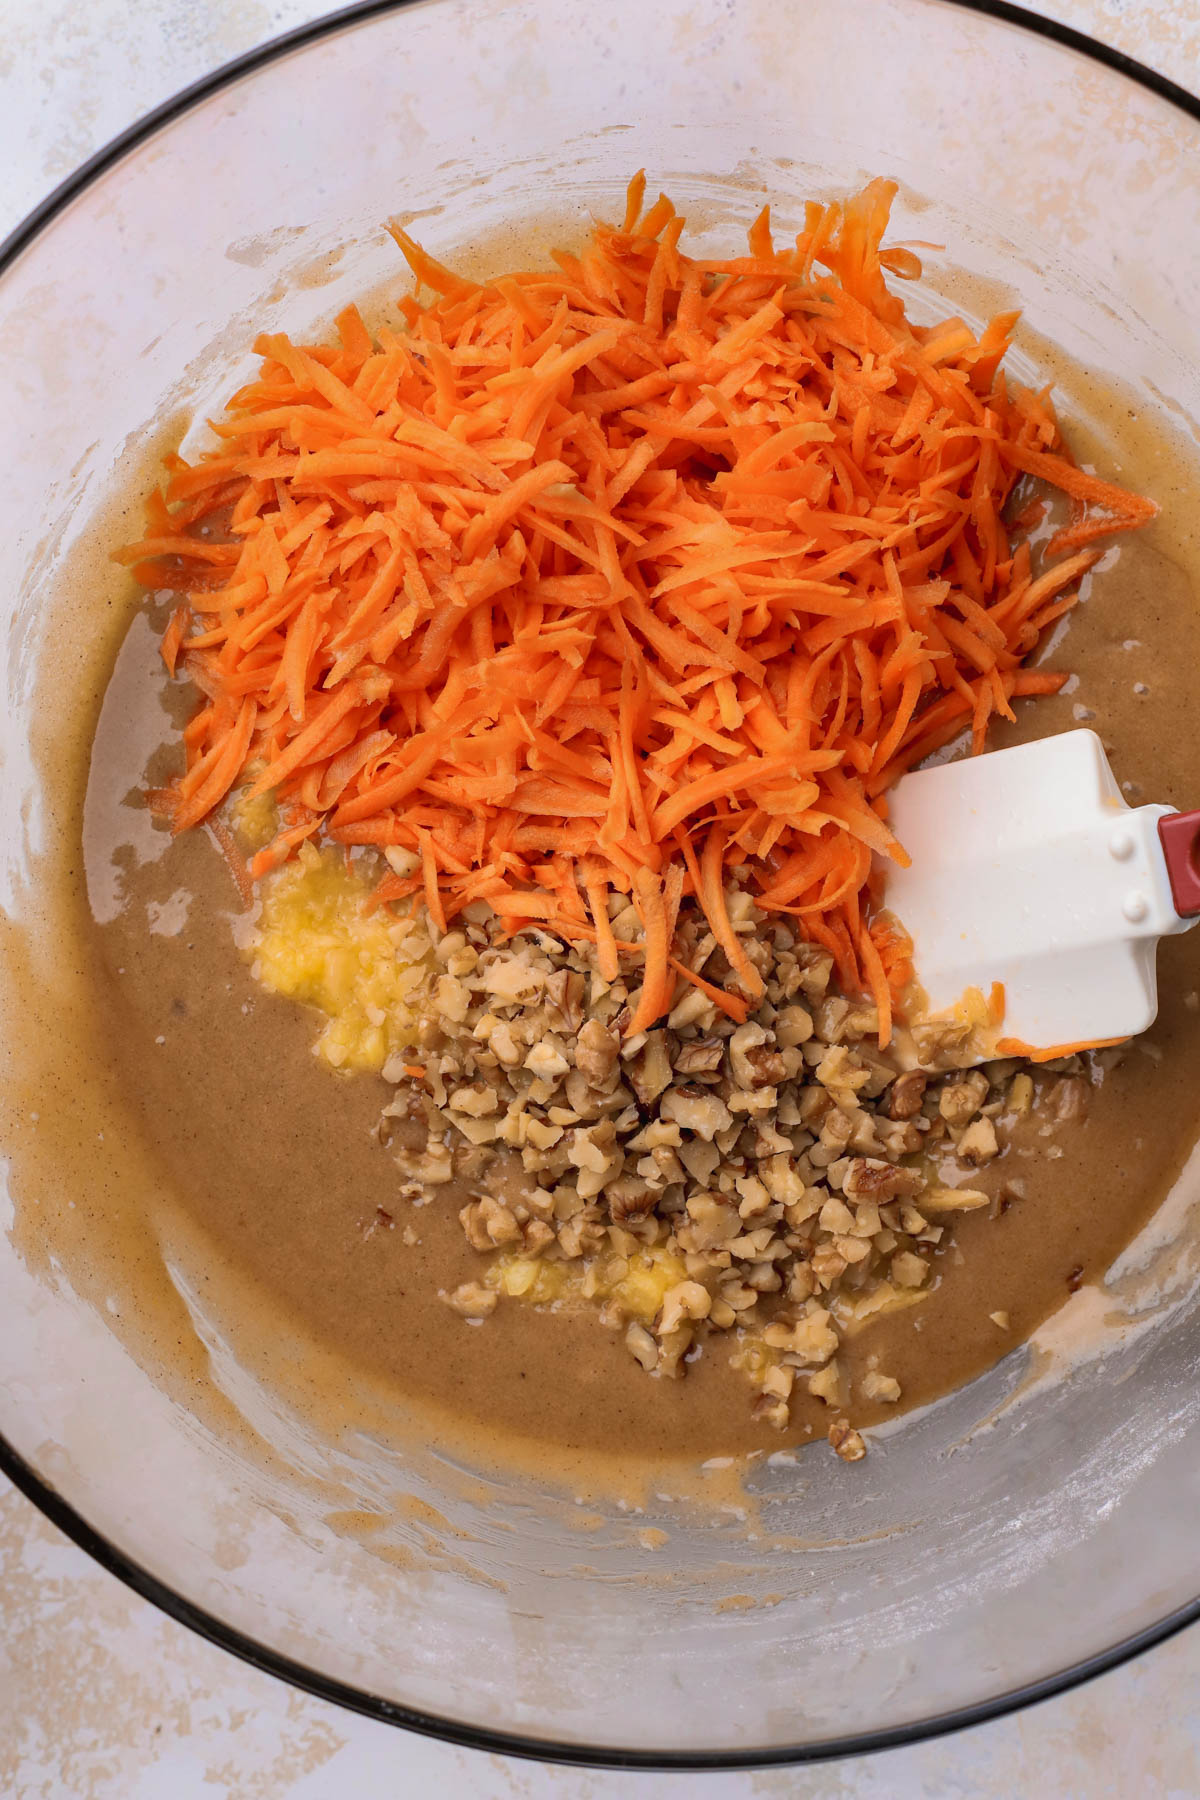 Cake batter, crushed pineapple, shredded carrots and walnuts. 